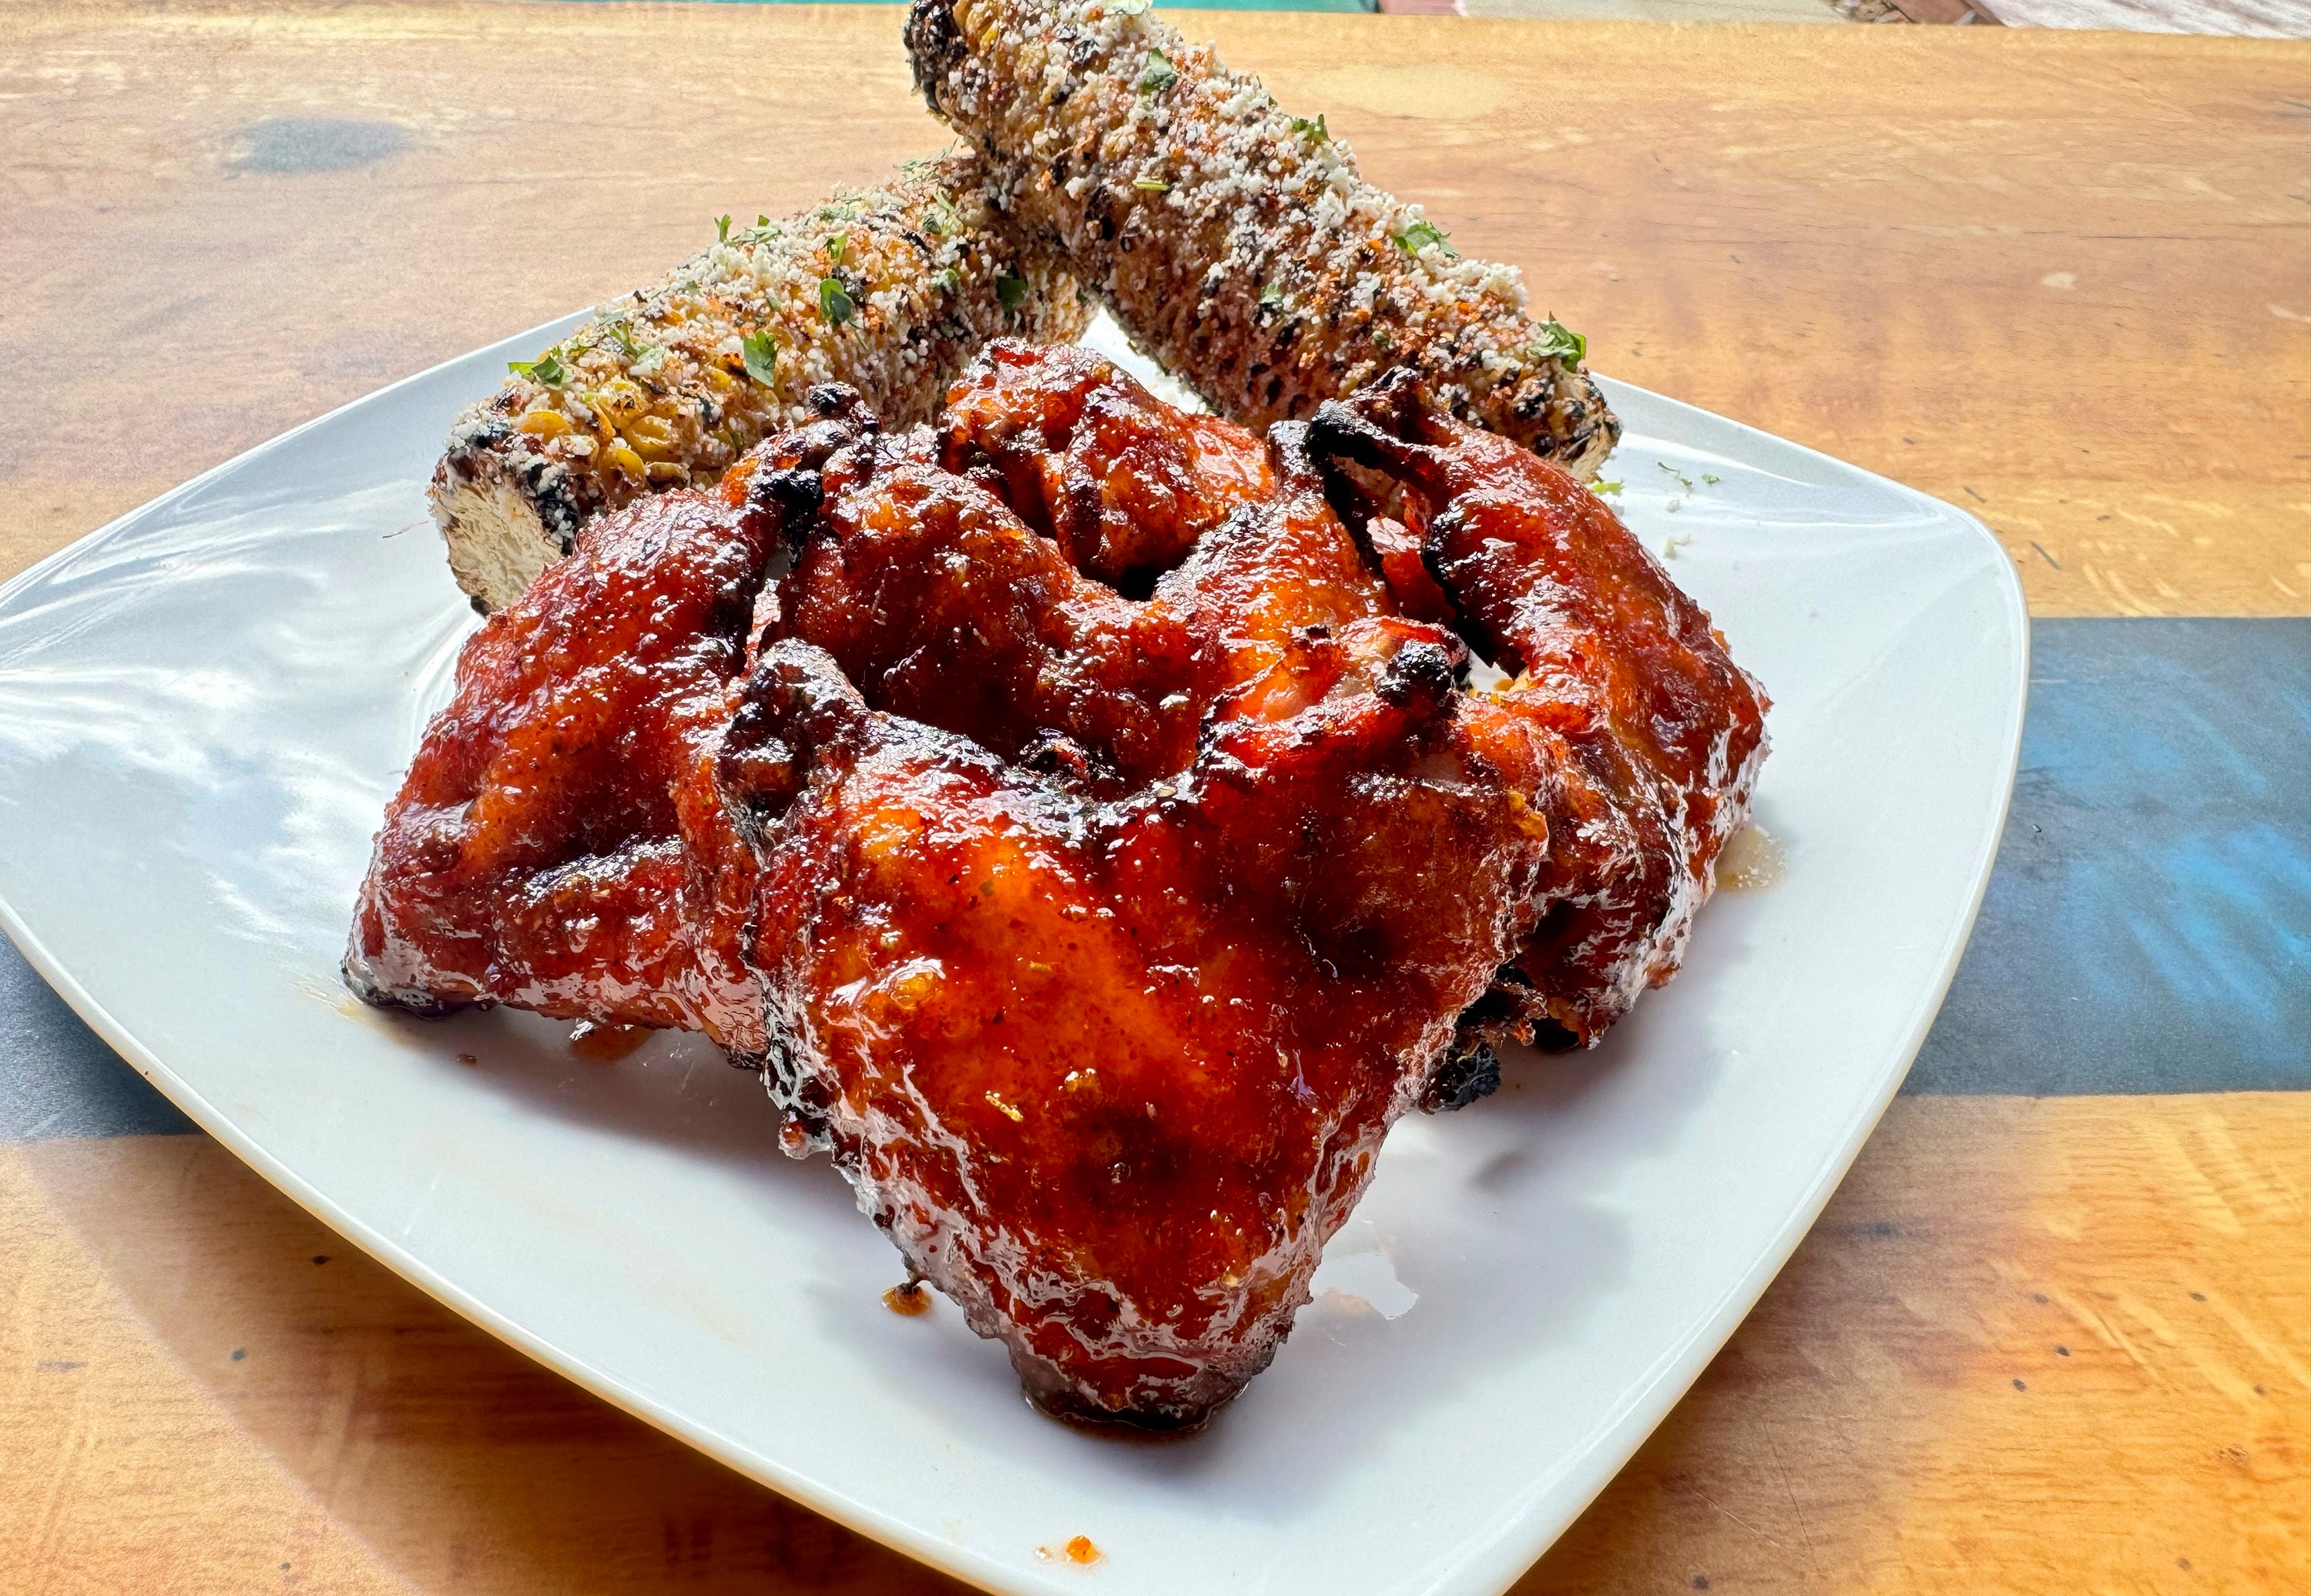 The O’Guins specialize in chicken wings, which make for an easy intro for backyard grillers looking to experiment with smoking this Memorial Weekend